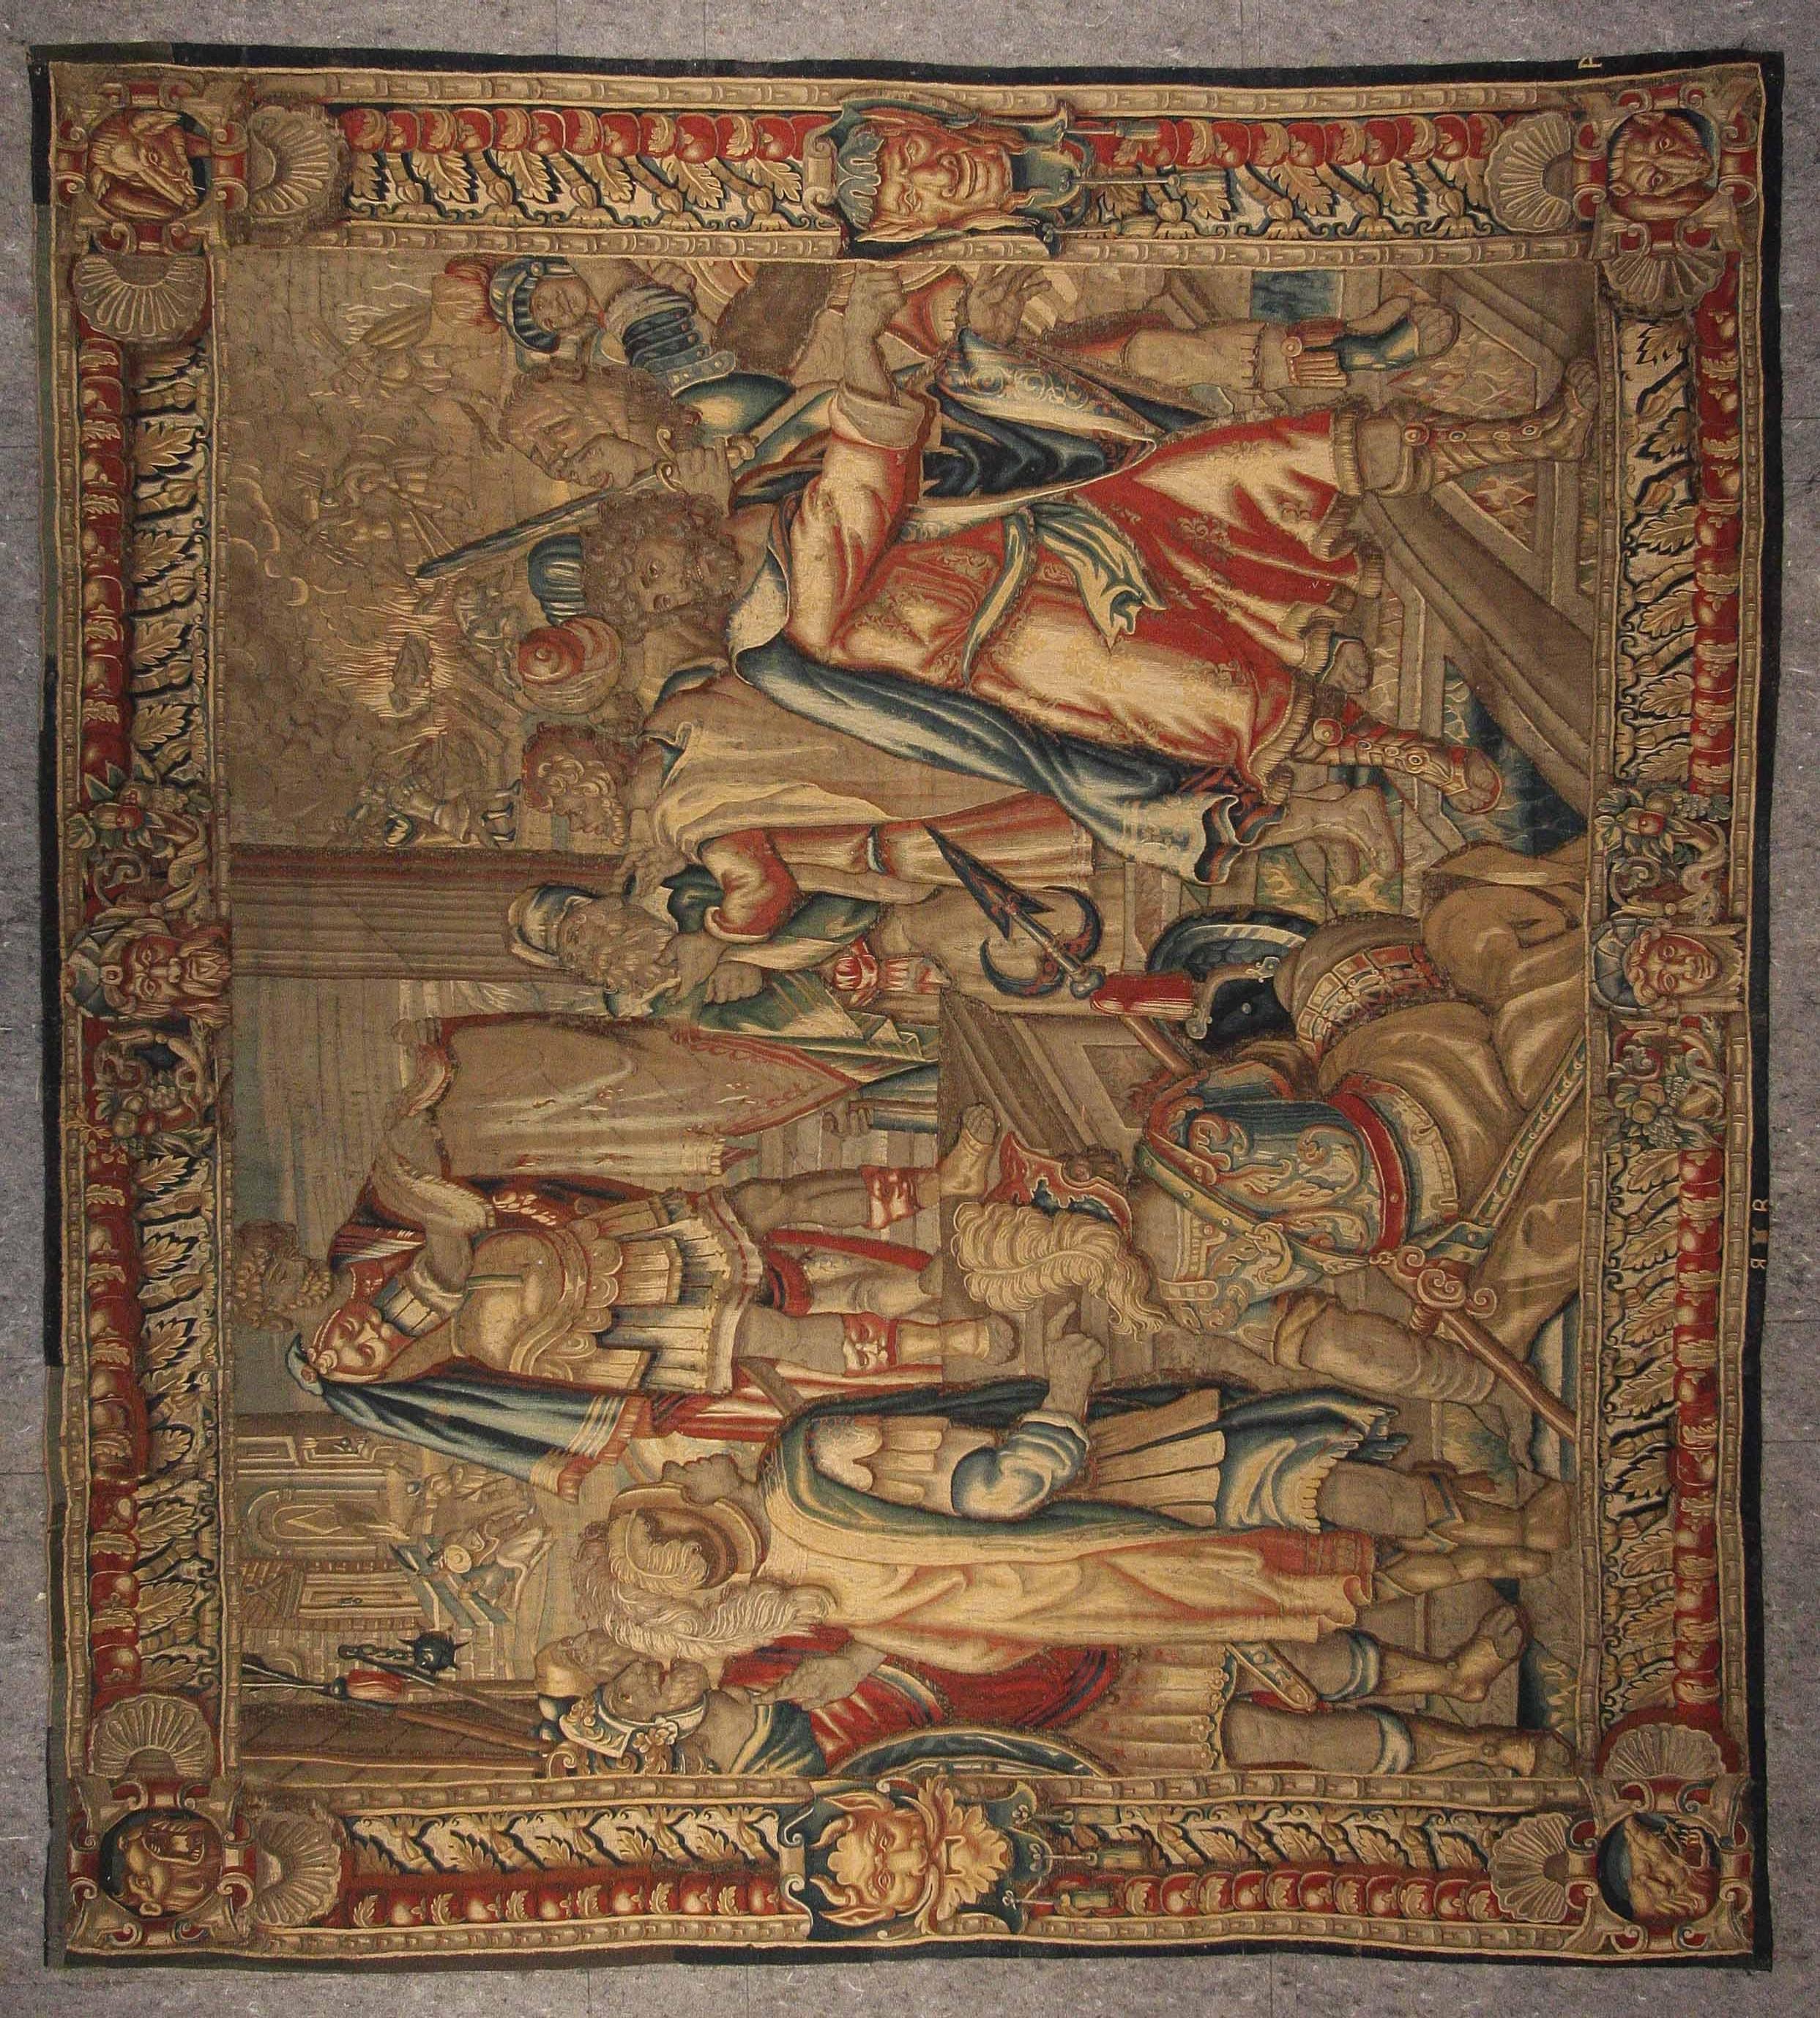 This is a fine example of a 16th century English tapestry in great condition.